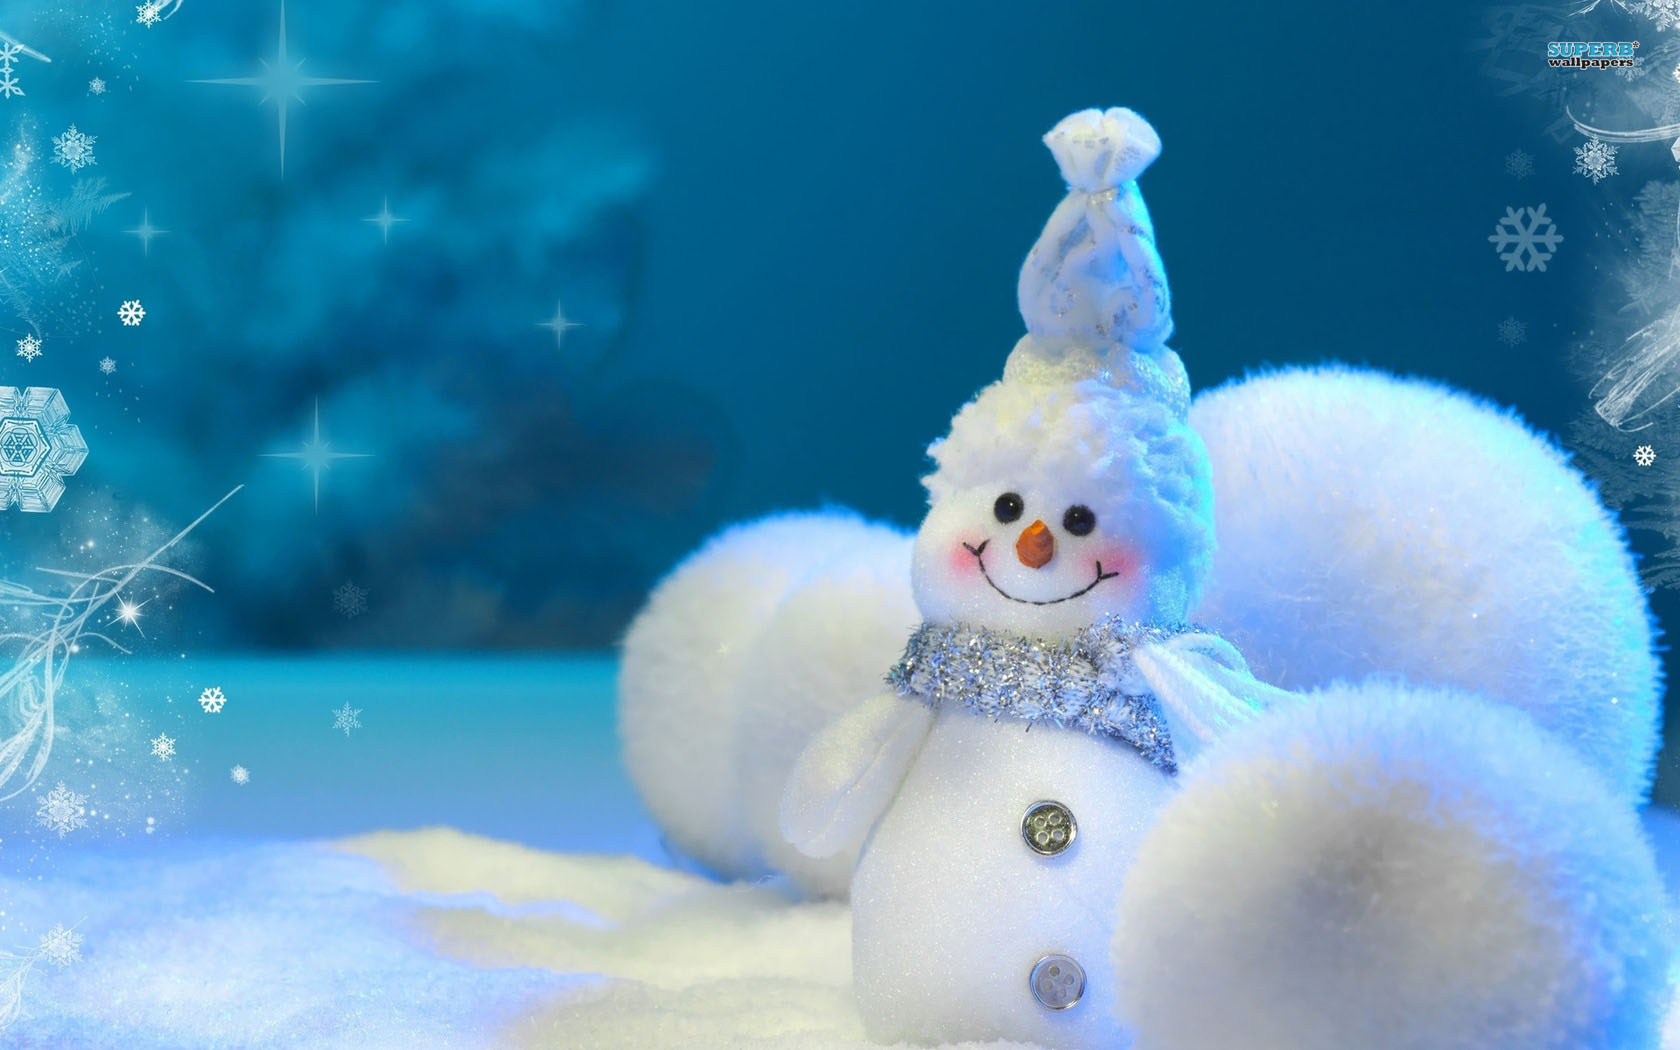 Download Cute Snowman Wallpaper pictures in high definition or